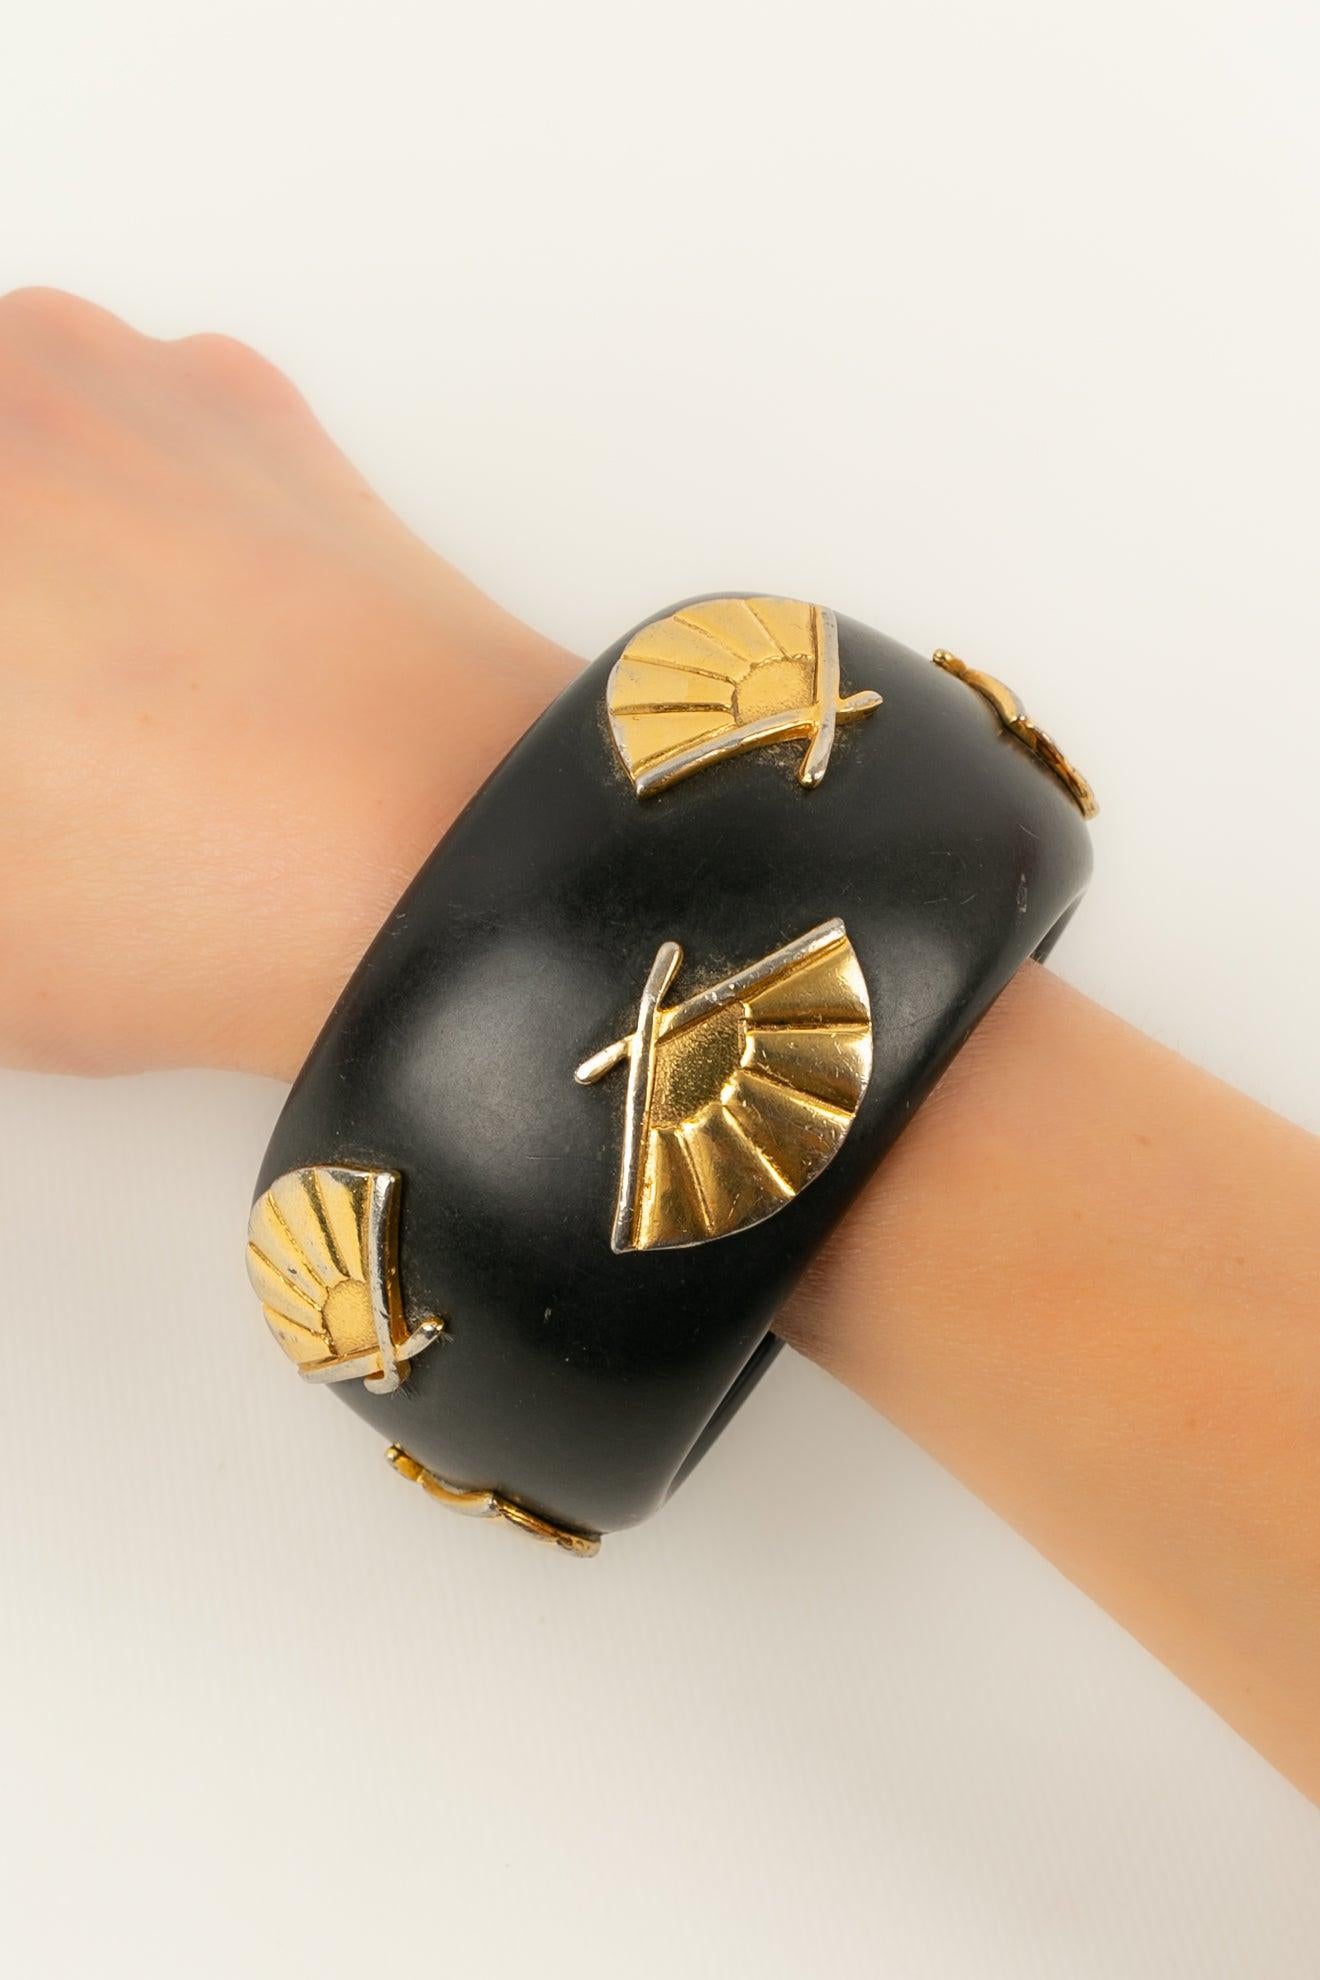 Lagerfeld - Bracelet in black bakelite ornamented with fans in gold-plated metal.

Additional information:
Condition: Good condition
Dimensions: Wrist circumference: 19 cm

Seller Reference: BRA177
